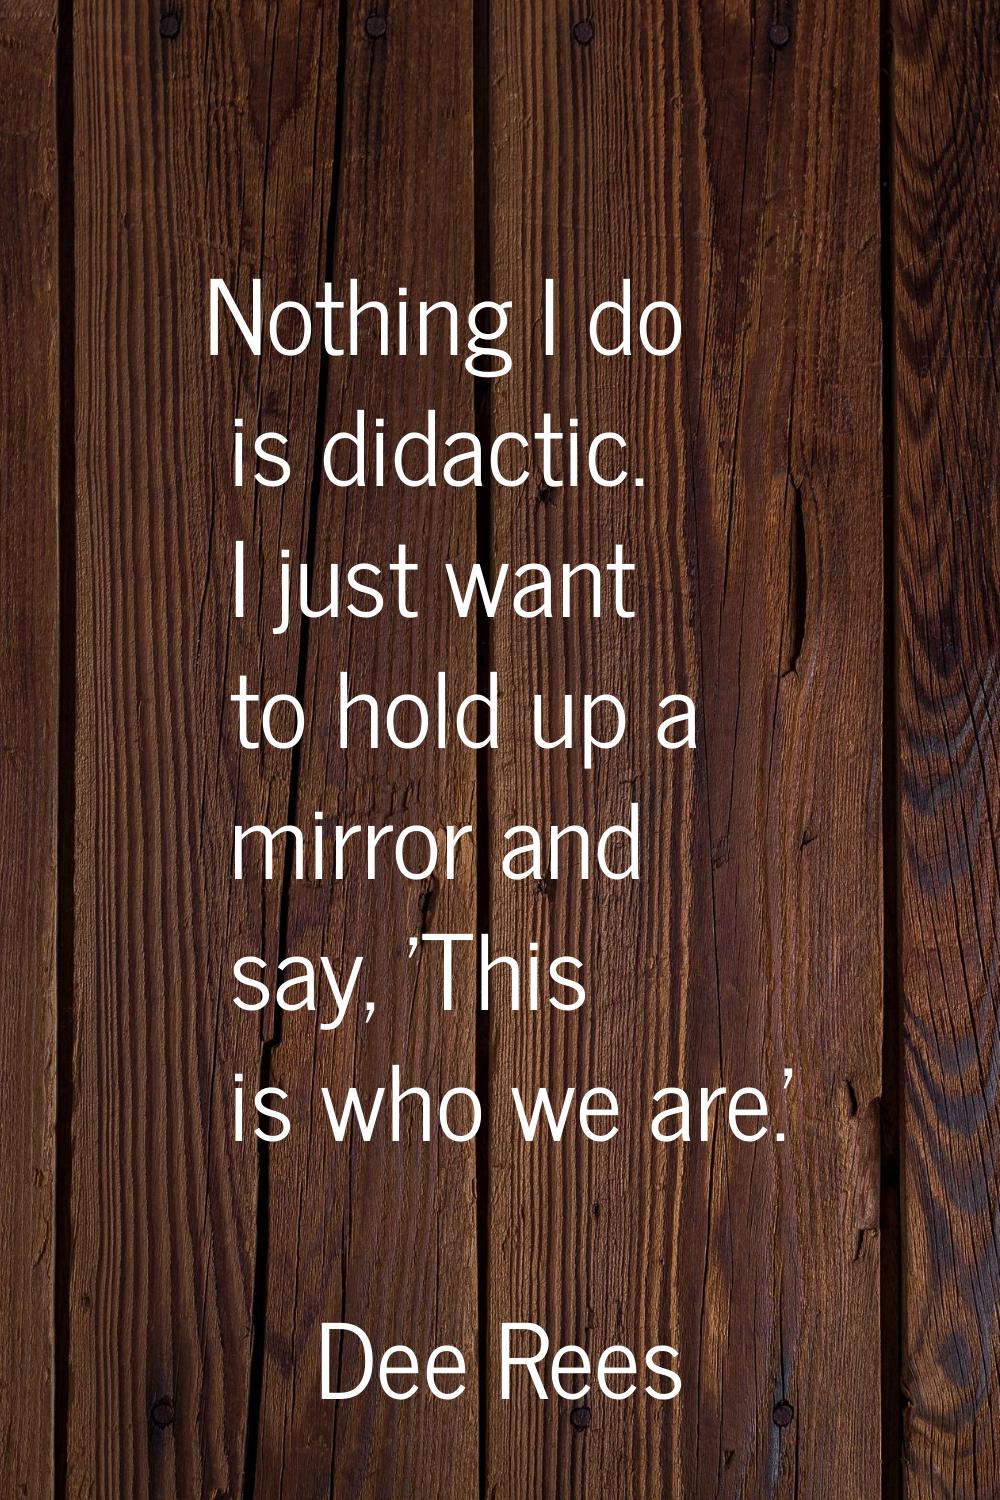 Nothing I do is didactic. I just want to hold up a mirror and say, 'This is who we are.'